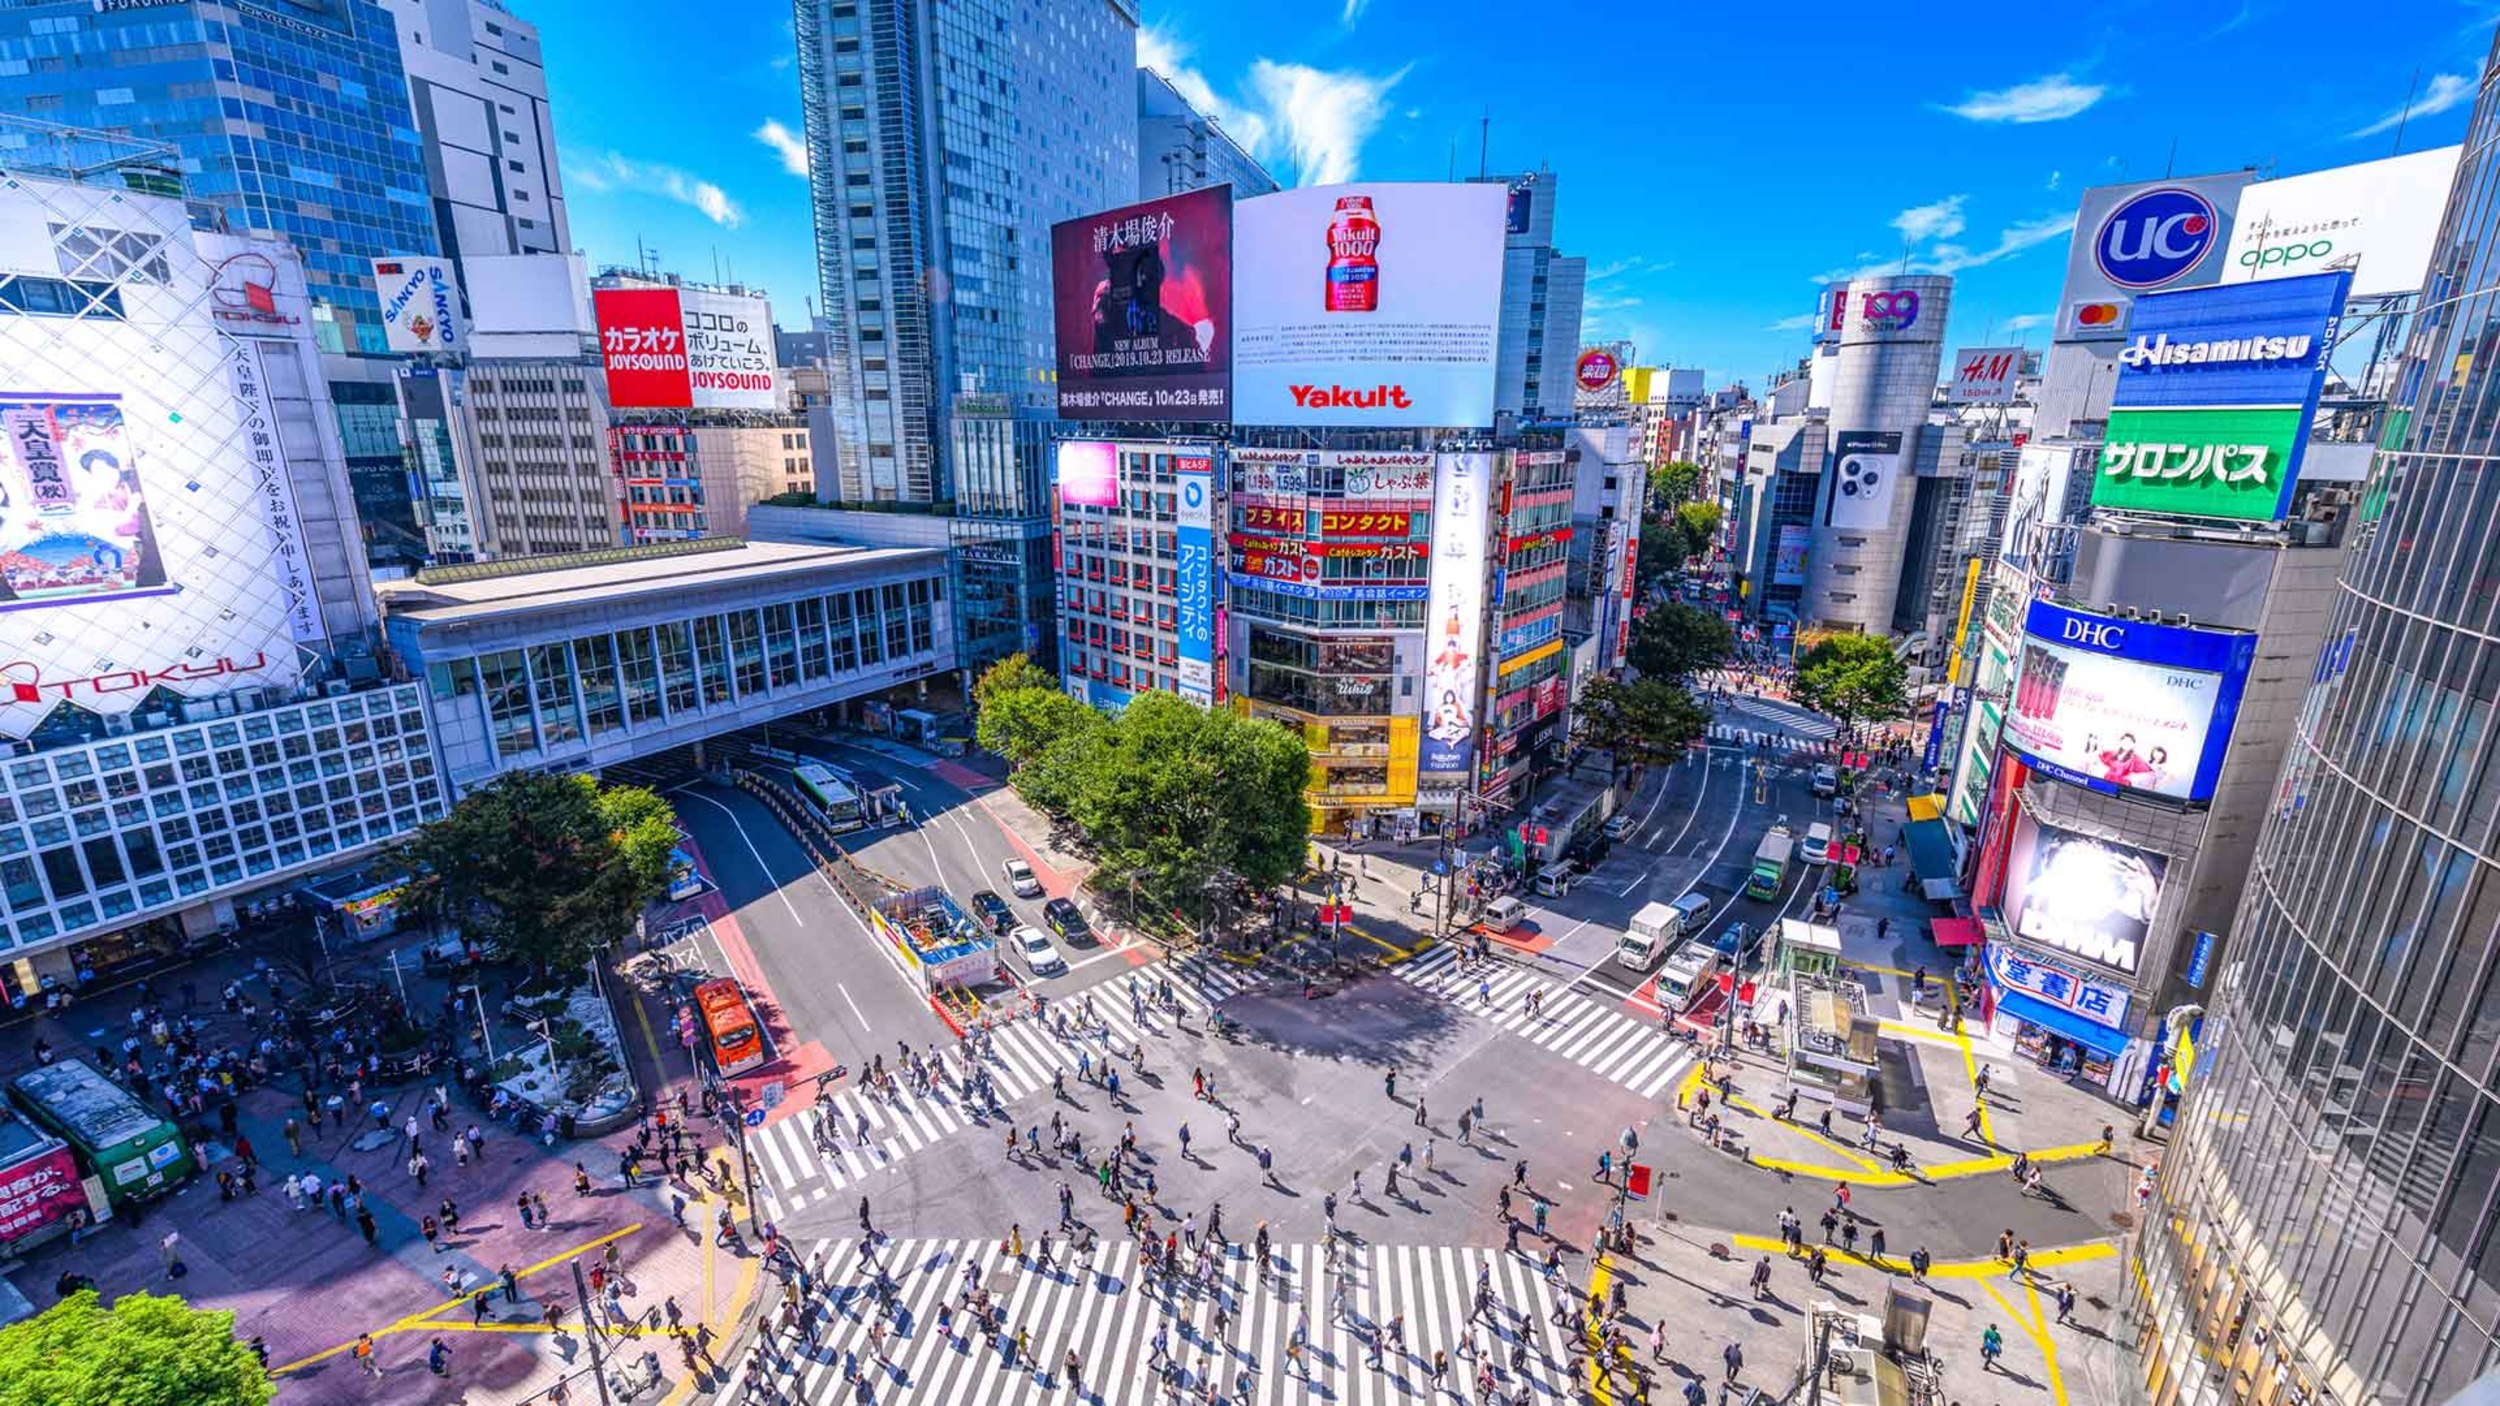 <p>The roll call at Shibuya includes great restaurants, modern skyscrapers, and some of the best views of the city. You can take an elevator to multiple observation decks that will make your jaw drop. We've never seen a skyline like this one, probably because one doesn't exist.</p><p>You may also like: <a href='https://www.yardbarker.com/lifestyle/articles/12_things_that_will_surprise_you_at_european_restaurants_031224/s1__38269648'>12 things that will surprise you at European restaurants</a></p>